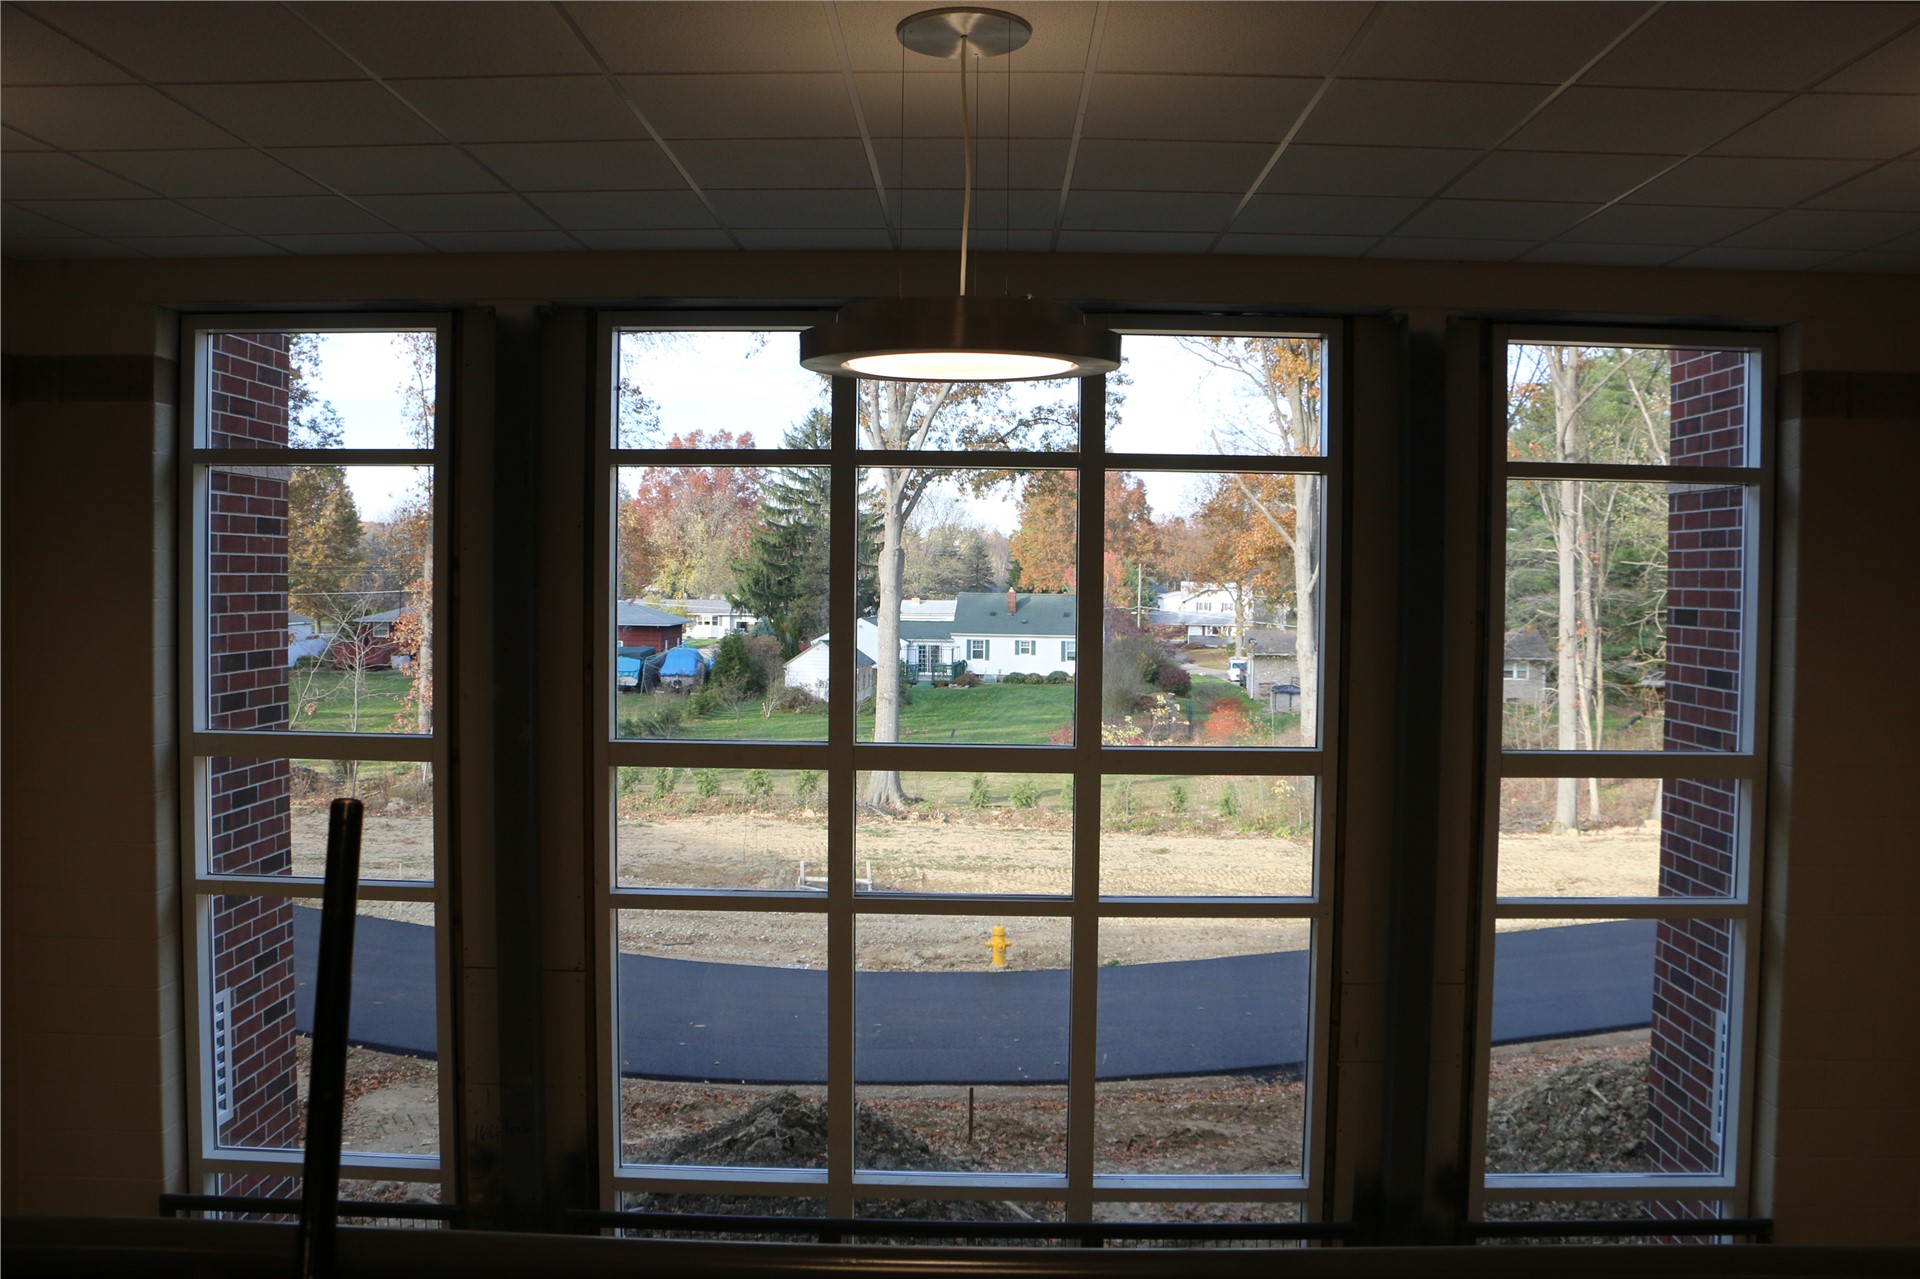 View of the North property of the campus (as seen from the 2nd floor of the Academic Wing)